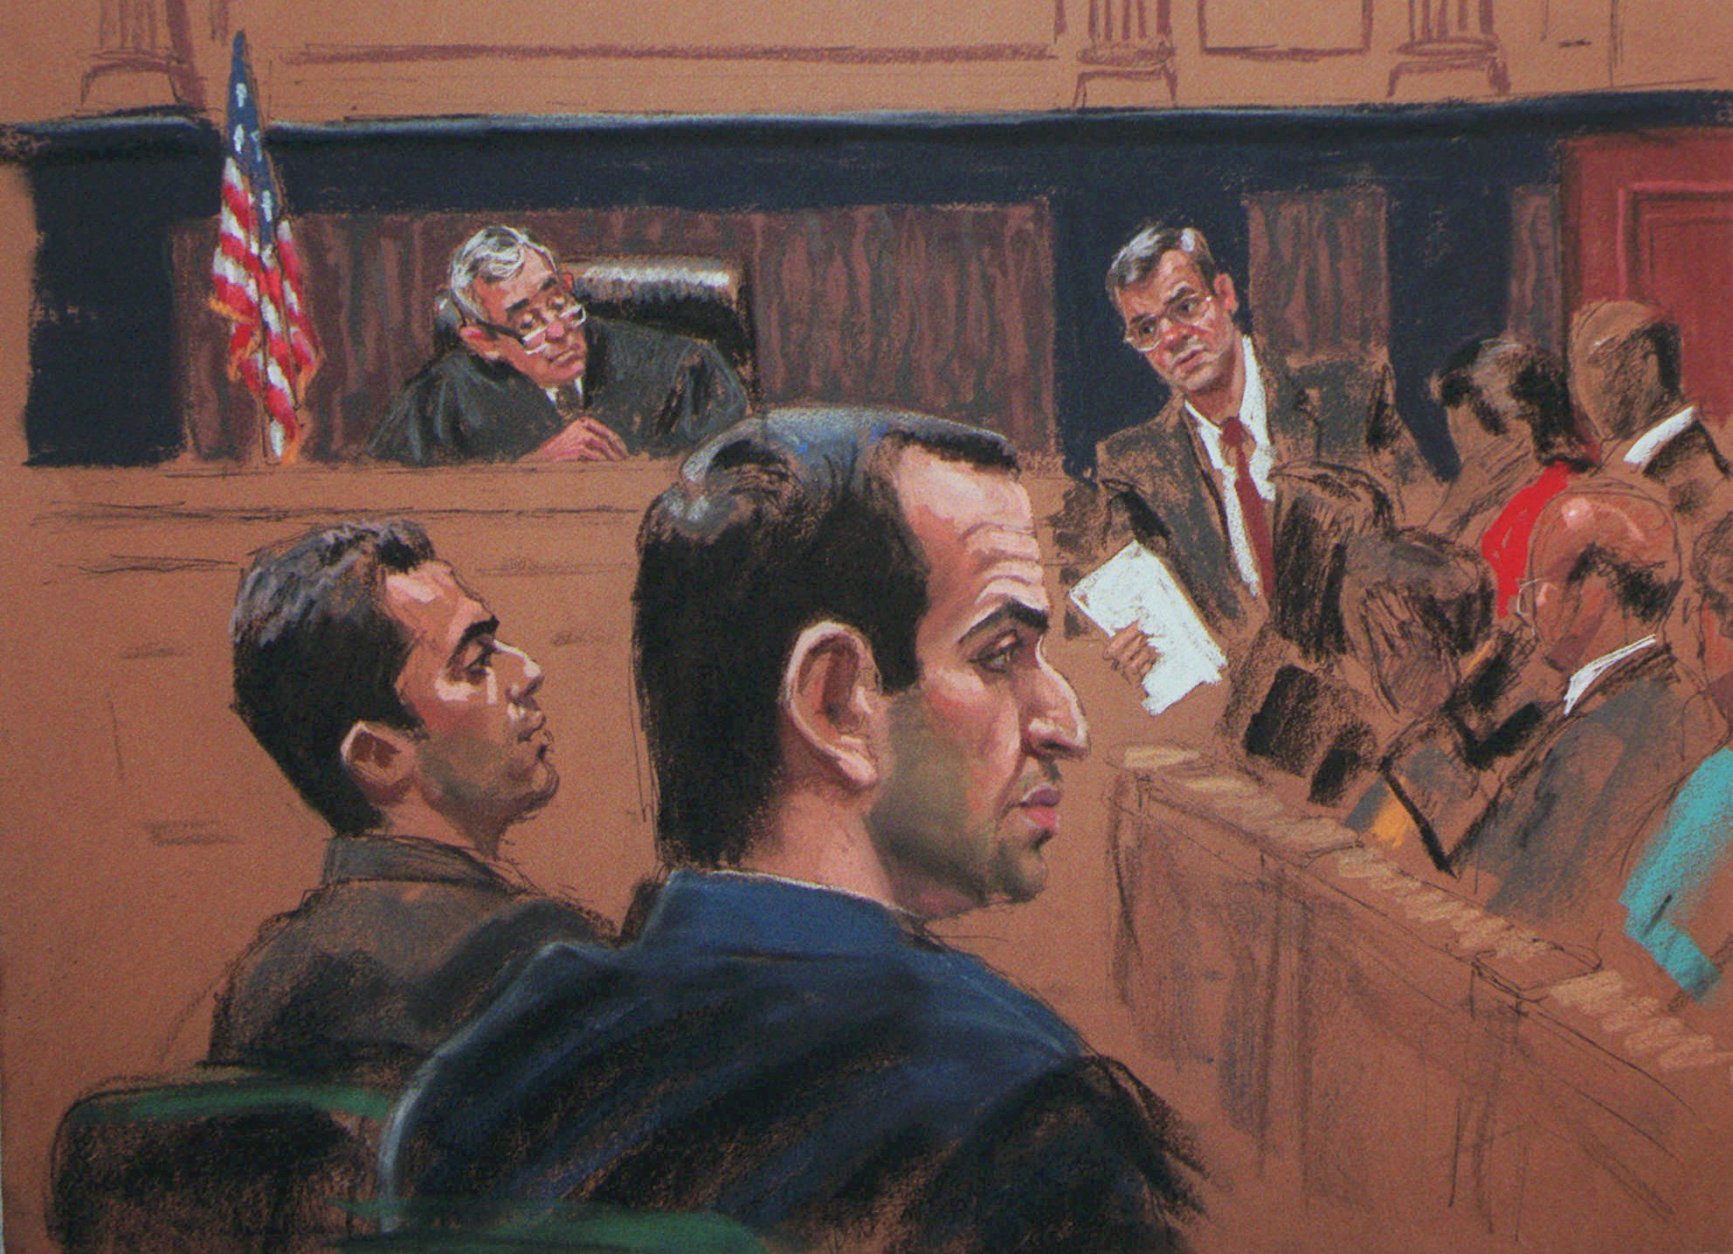 World Trade Center bombing suspects Eyad Ismoil, 26, left, and Ramzi Yousef, 29, foreground, watch the jury in this artist's rendering as the verdict is read Wednesday, Nov. 12, 1997, in New York. U.S. District Judge Kevin Duffy looks on in background. The defendants were found guilty on all counts Wednesday. (AP Photo/Jane Rosenberg)